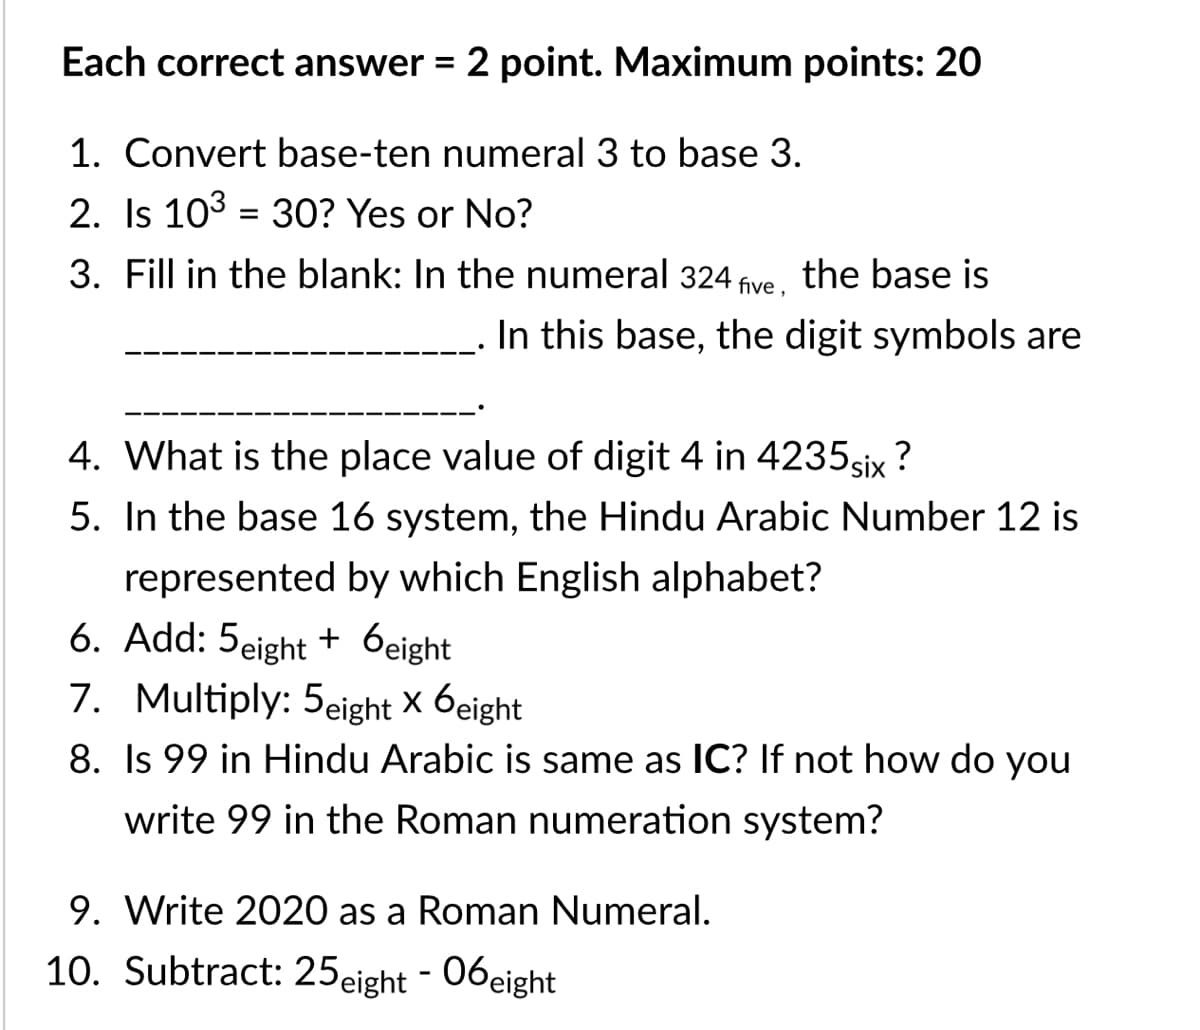 Each correct answer = 2 point. Maximum points: 20
1. Convert base-ten numeral 3 to base 3.
2. Is 103 = 3O? Yes or No?
3. Fill in the blank: In the numeral 324
five ,
the base is
In this base, the digit symbols are
4. What is the place value of digit 4 in 4235six ?
5. In the base 16 system, the Hindu Arabic Number 12 is
represented by which English alphabet?
6. Add: 5eight + 6eight
7. Multiply: 5eight X 6eight
8. Is 99 in Hindu Arabic is same as IC? If not how do you
write 99 in the Roman numeration system?
9. Write 2020 as a Roman Numeral.
10. Subtract: 25eight - 06eight
